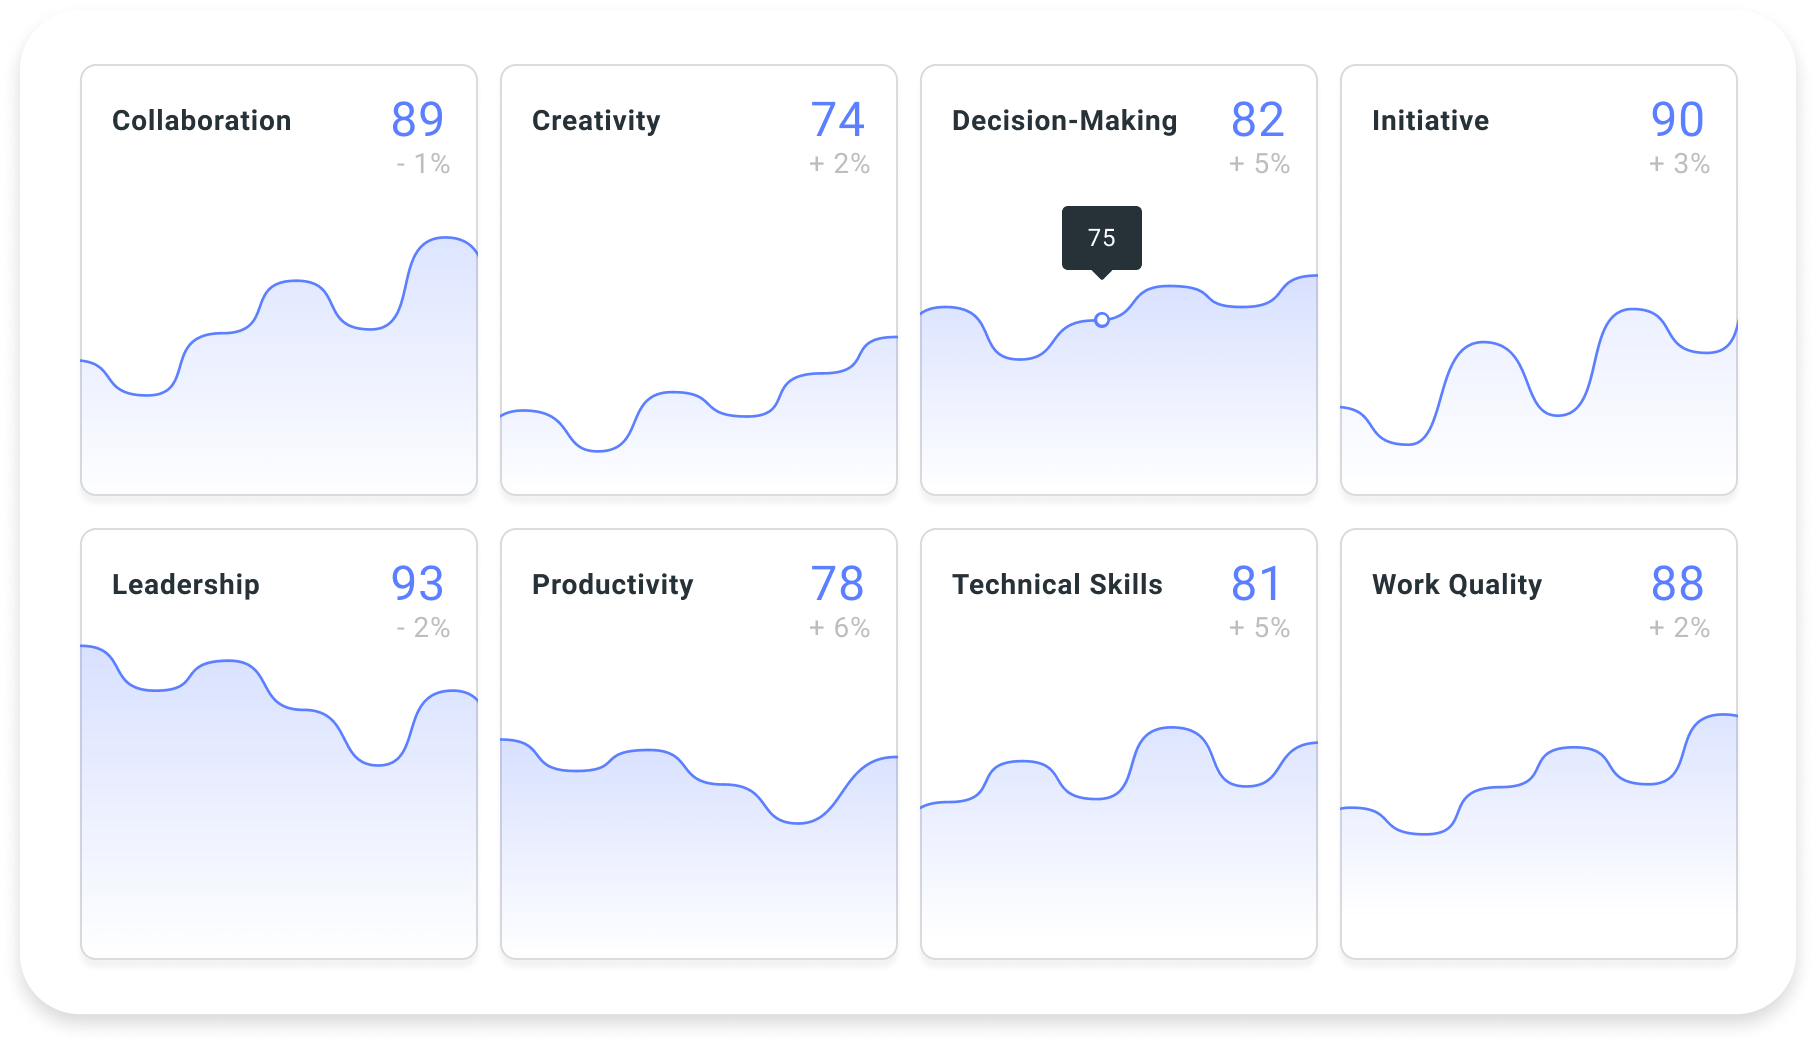 Rather than measuring your whole team by the same ten categories, customize the process so that you measure what matters for each team member. Continuous reviews allow you to track progress over time and be more targeted with identifying areas for growth.